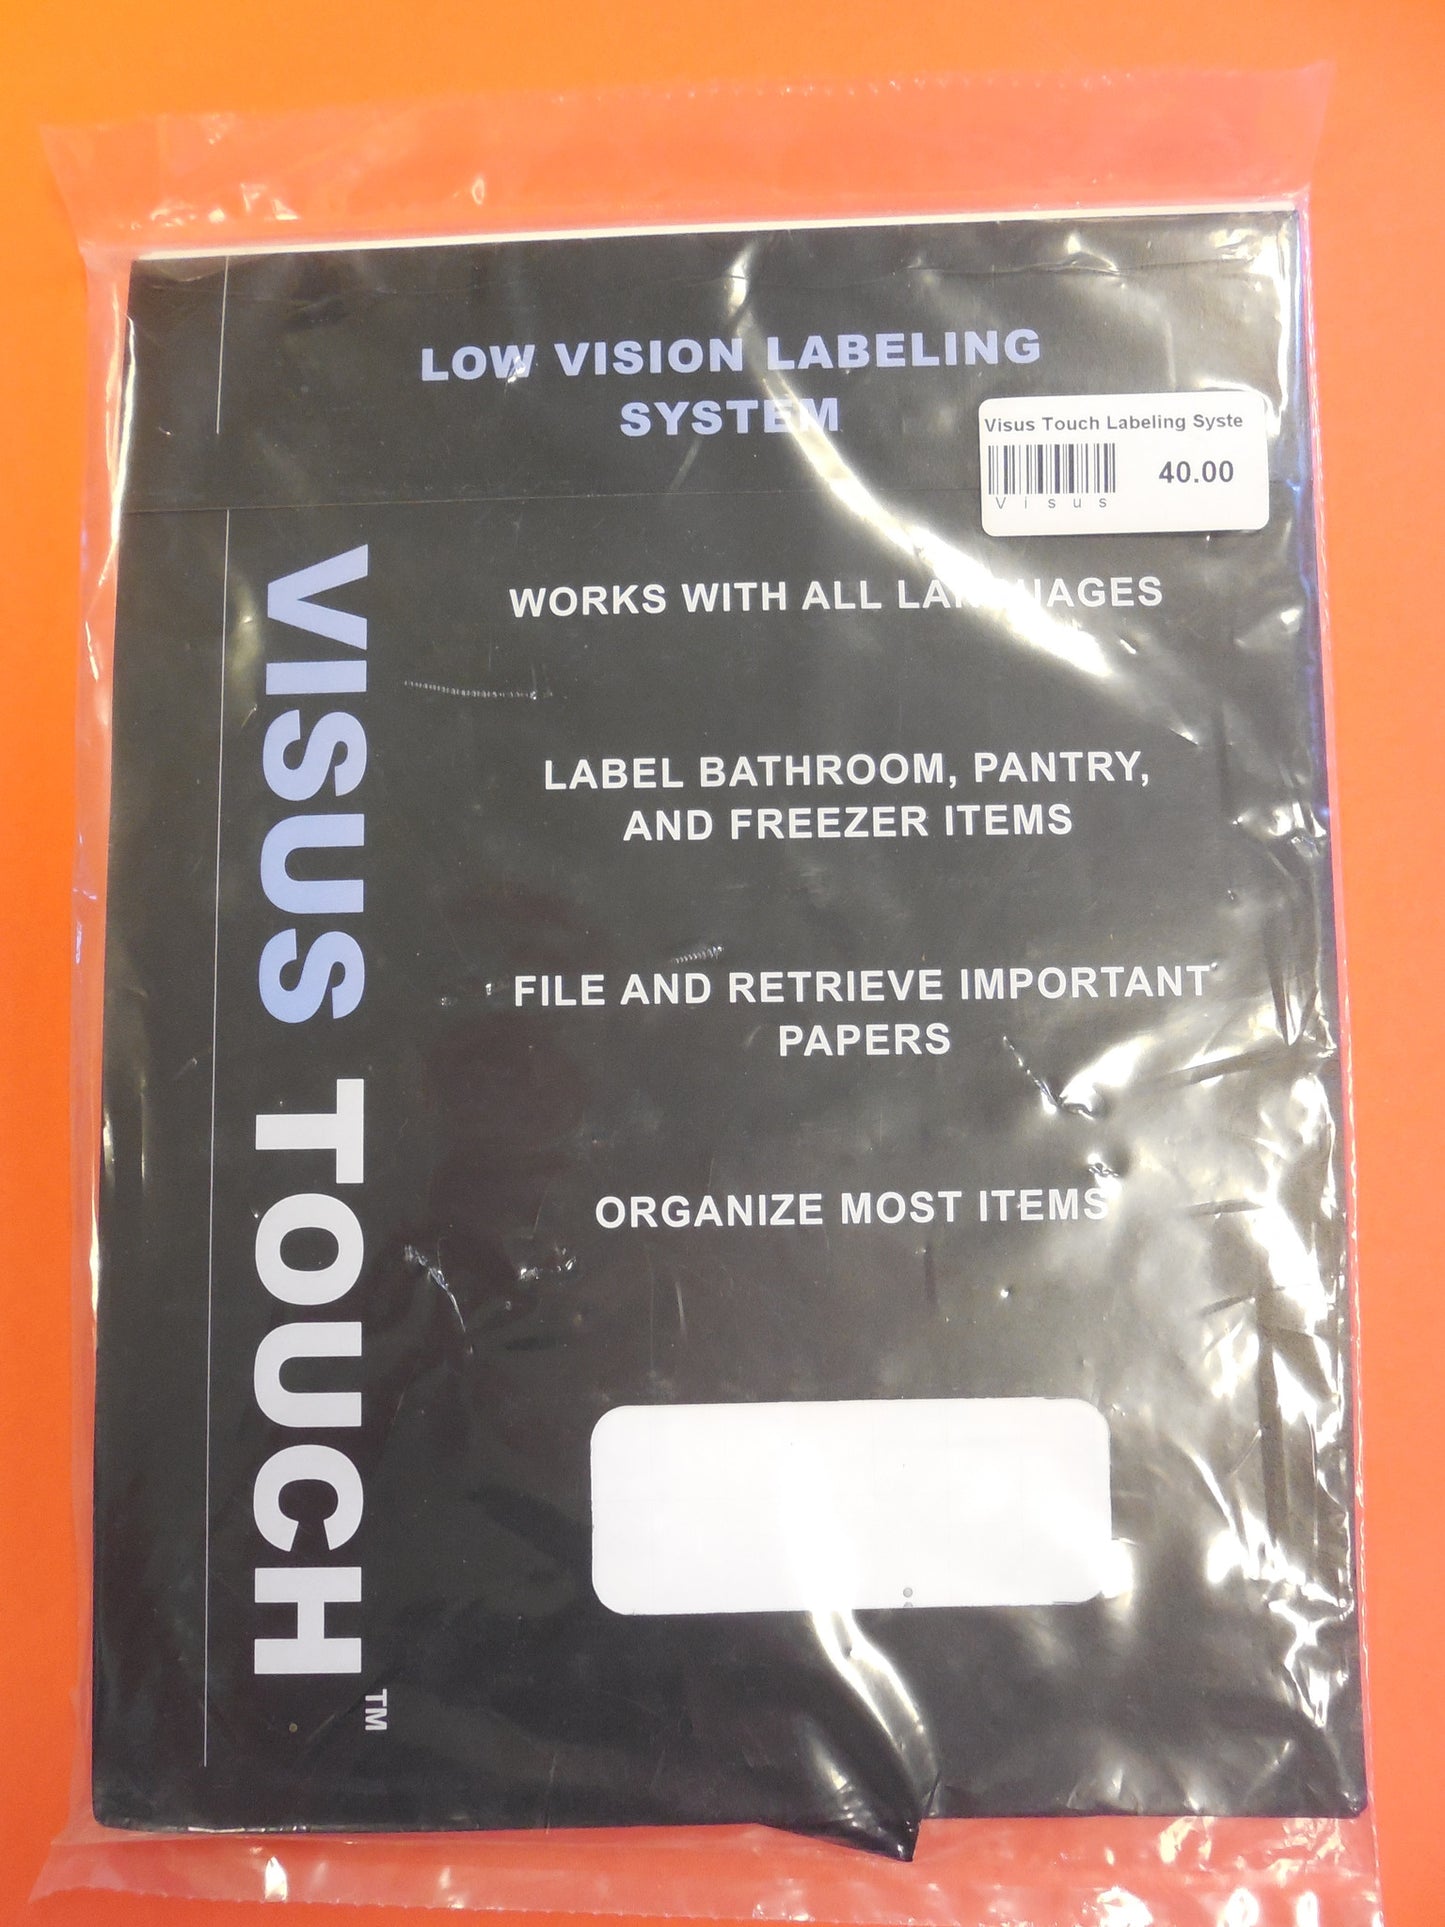 A sheet of Visus Touch labeling sheets